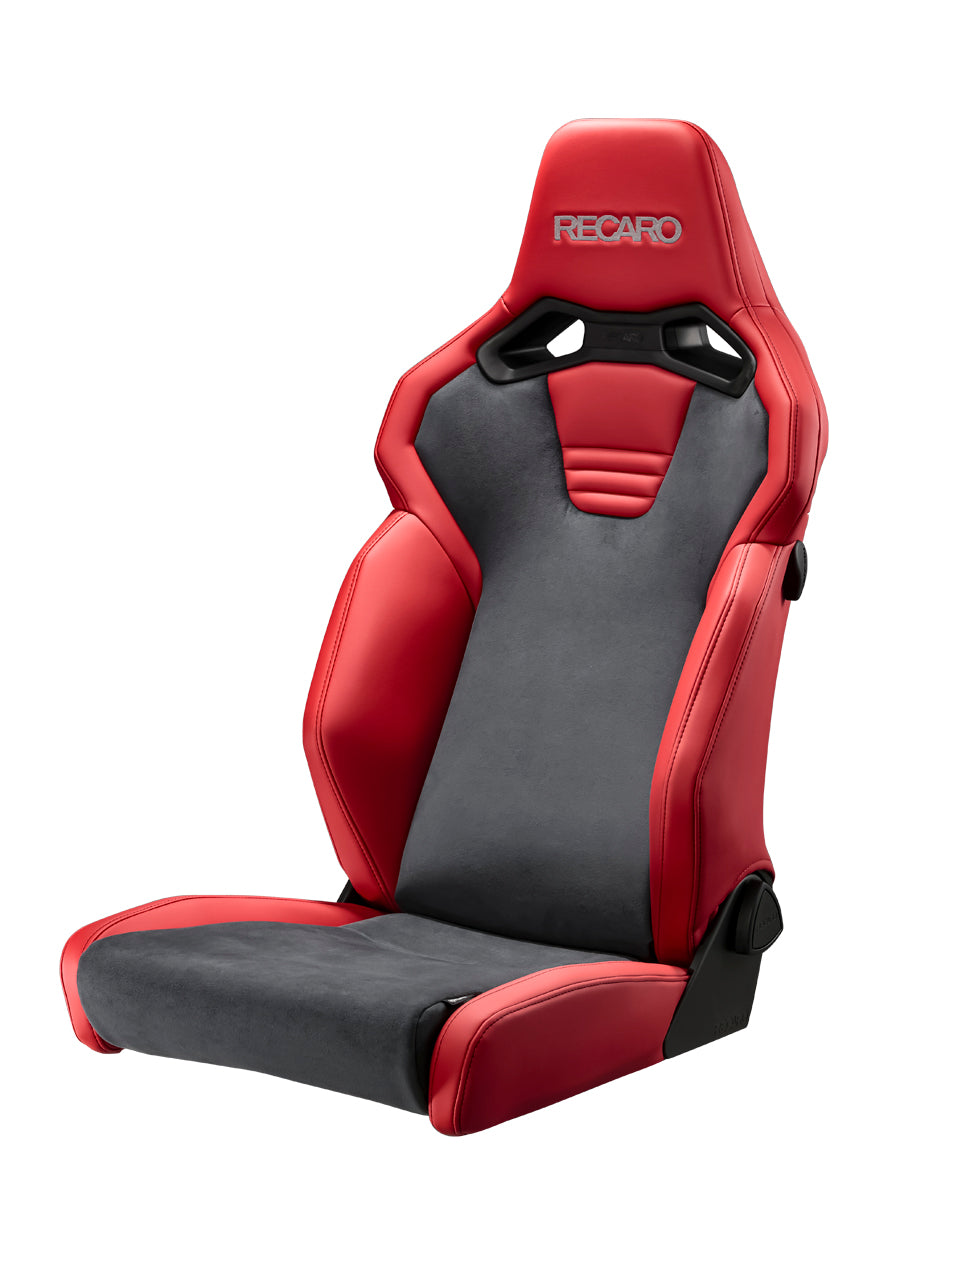 RECARO SR-C UT100H CG RD ARTIFICIAL LEATHER RED COLOR AND ULTRA SUEDE CHARCOAL GRAY COLOR WITH HEATED SEATS FOR  81-121.21.647-0